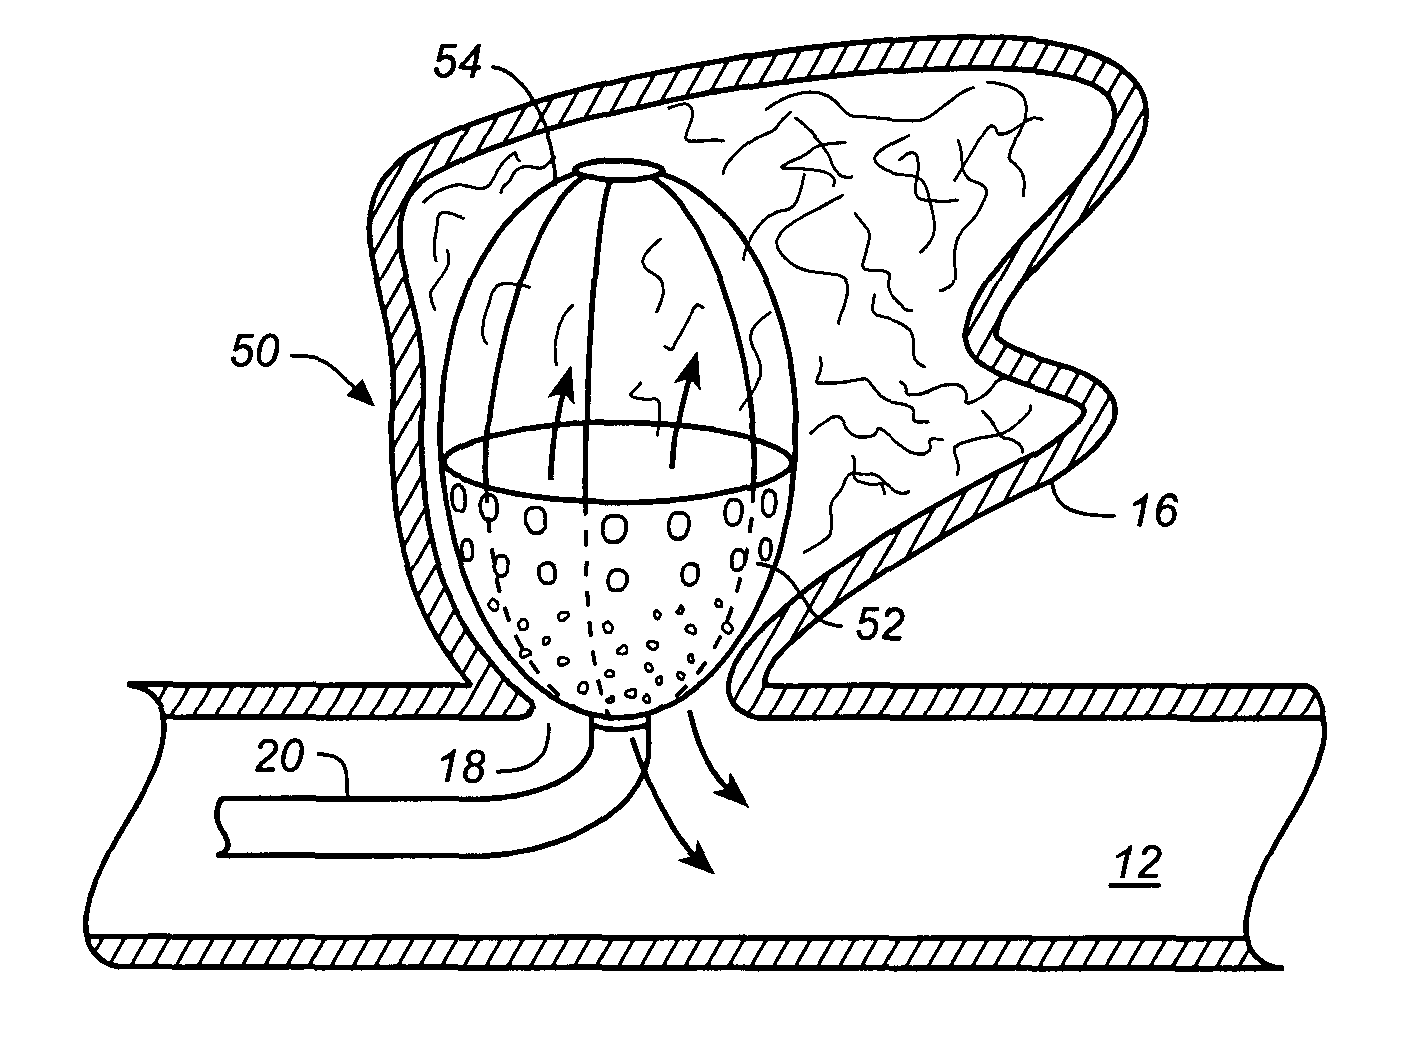 Expandable body cavity liner device